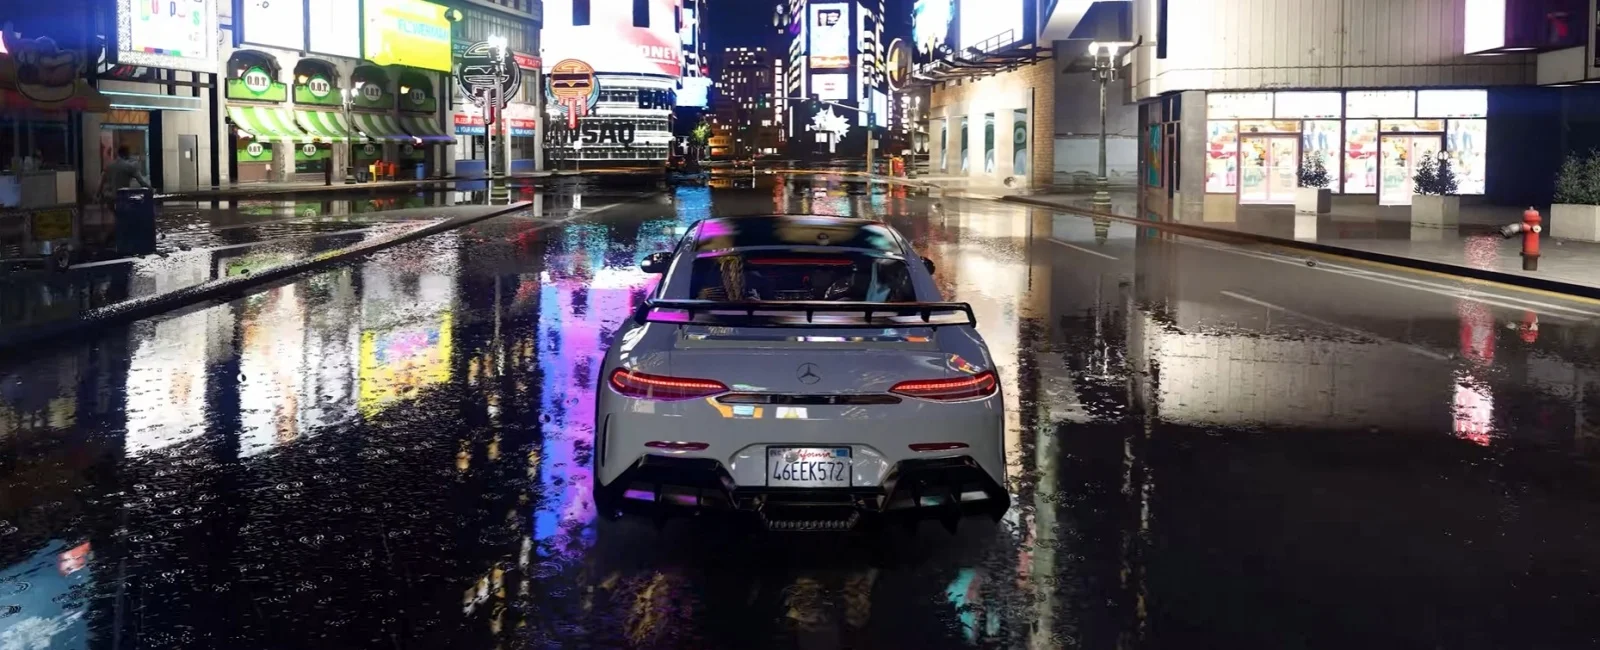 Photorealistic GTA 4 shown in 8K resolution and ray tracing